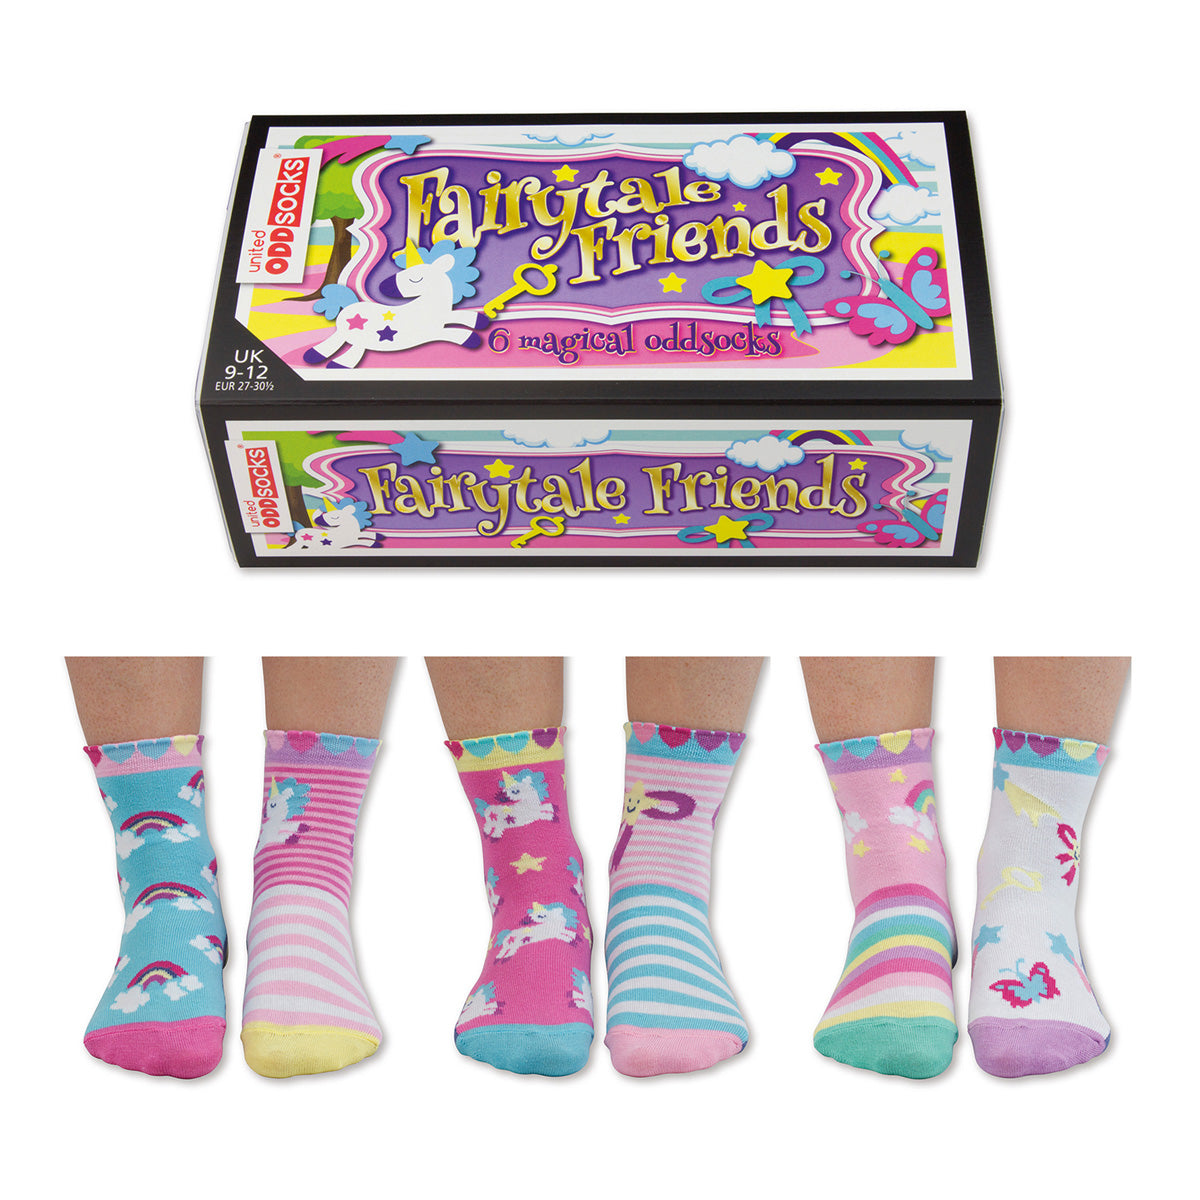 Socks for 4 to 8 years - Fairytale Friends